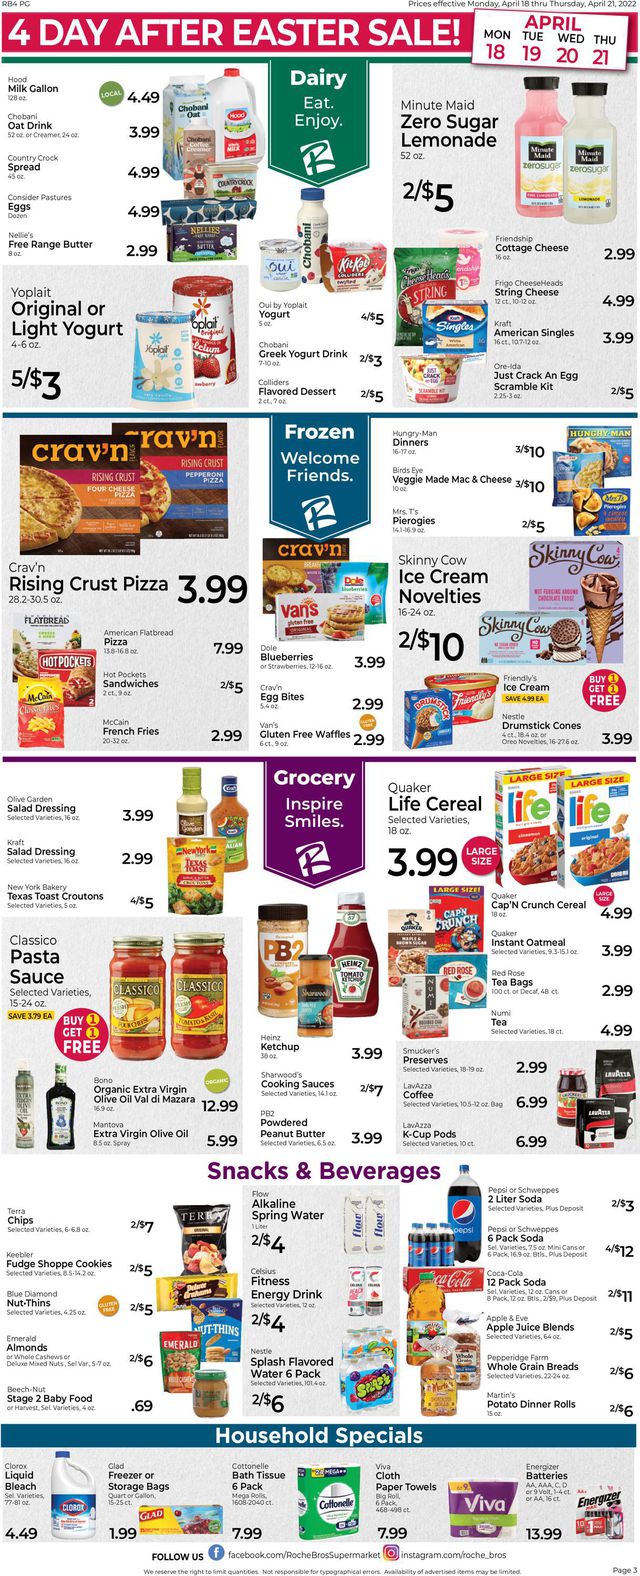 Roche Bros. Supermarkets Ad from 04/18/2022